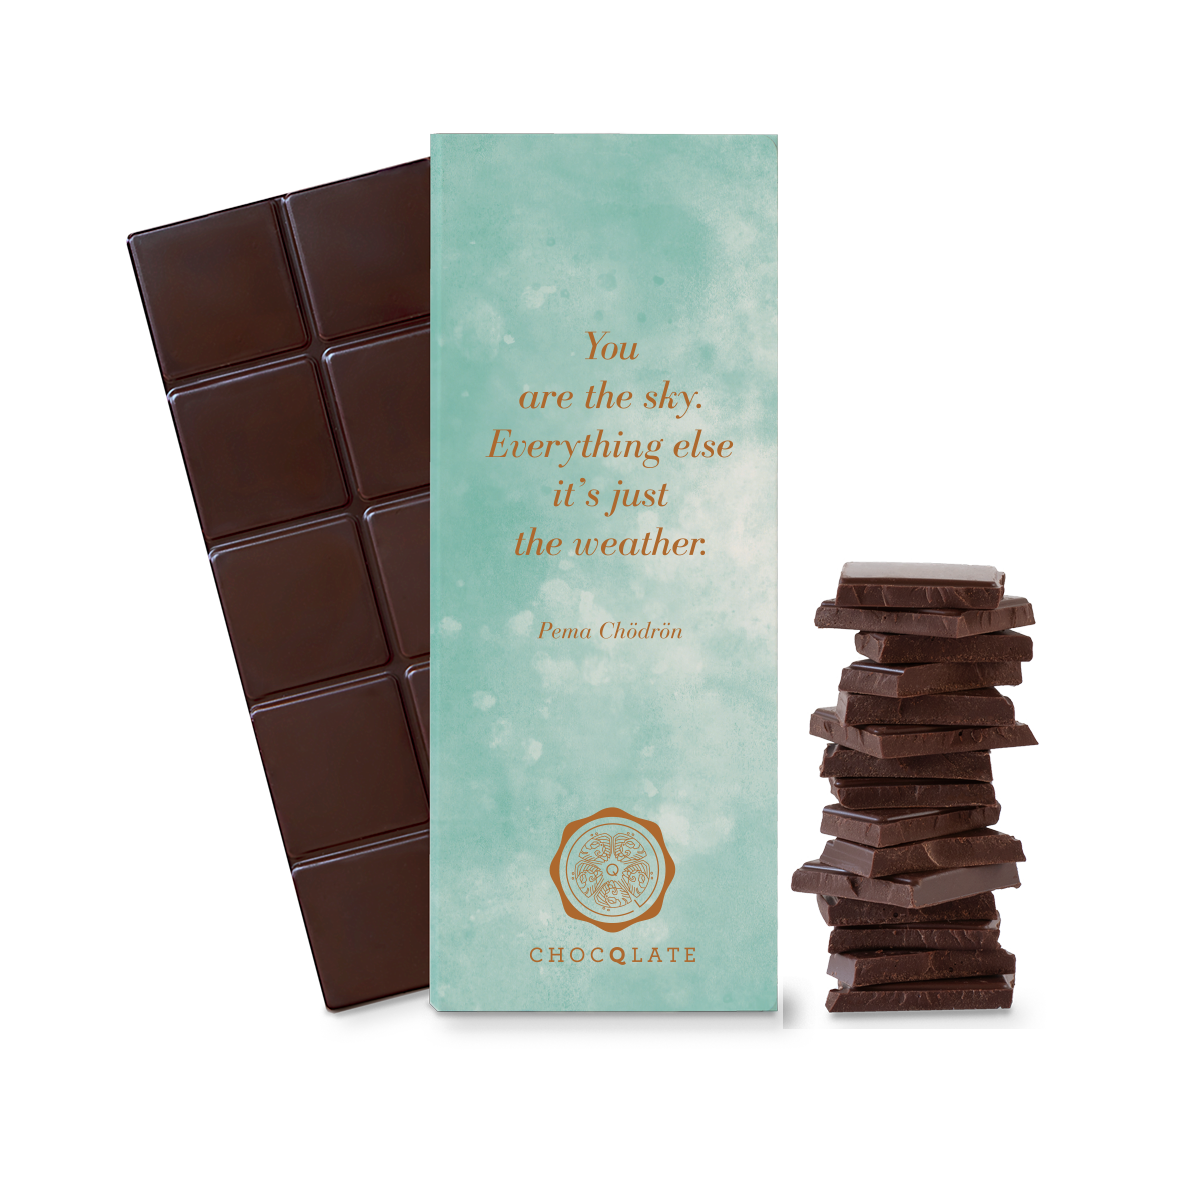 “You are the sky. Everything else it’s just the weather.” CHOCQLATE organic chocolate 50% cacao